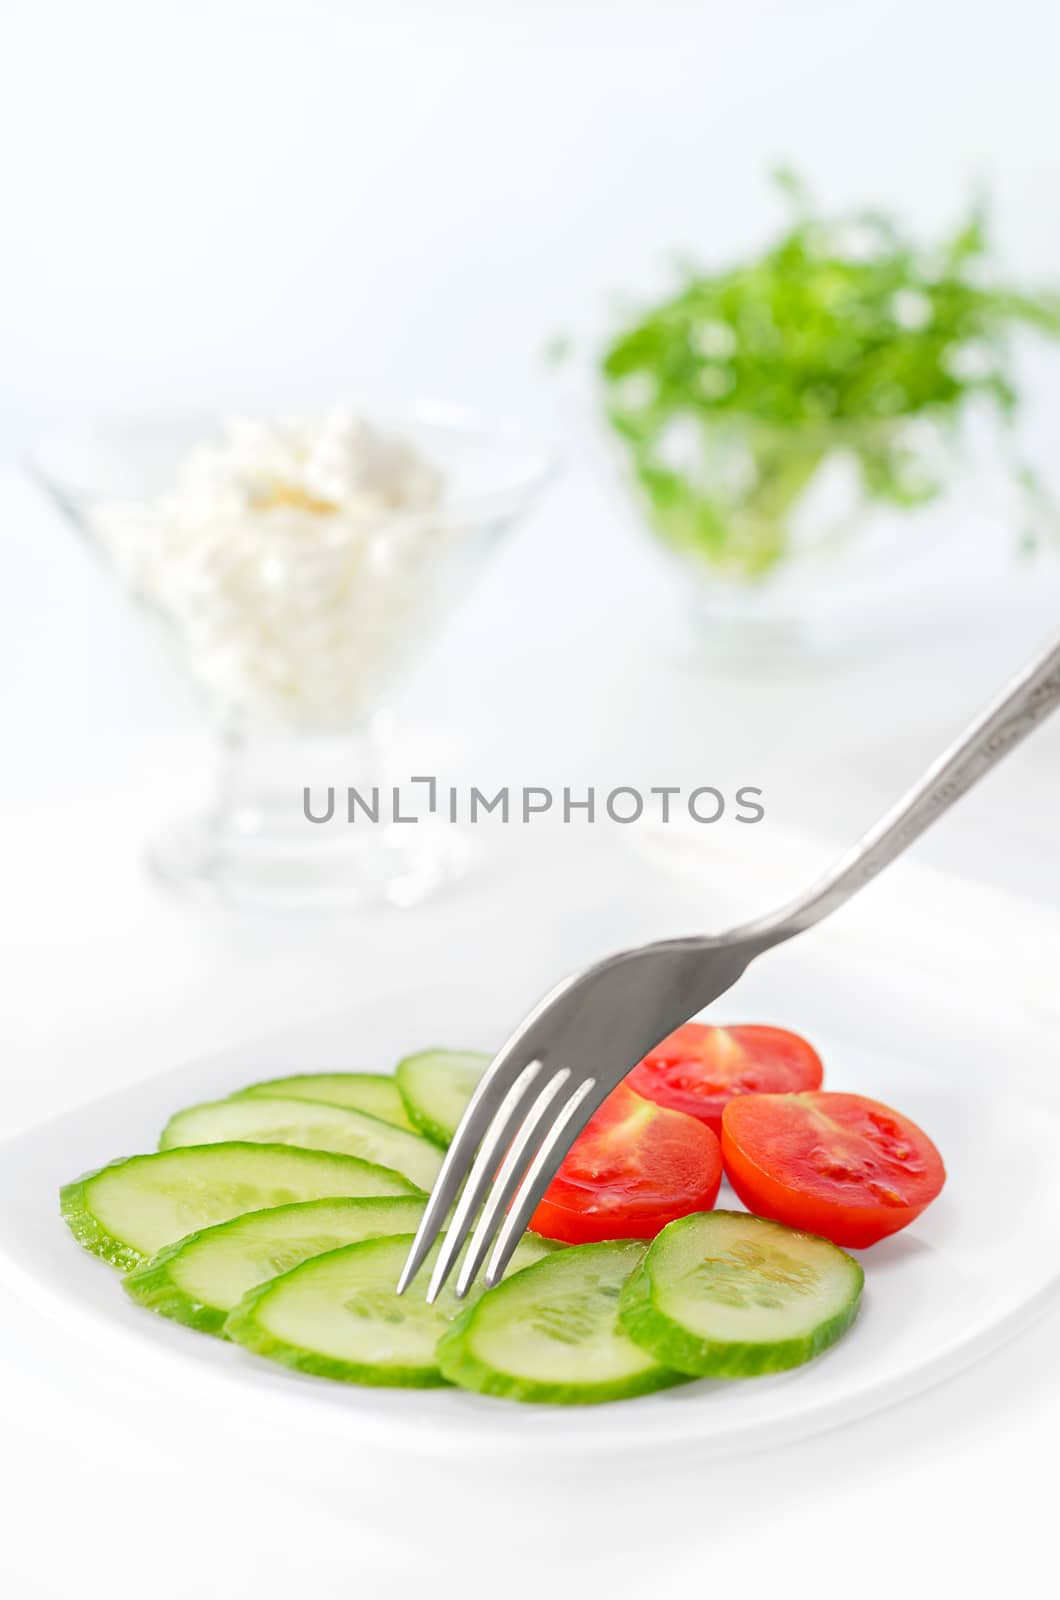 Sliced tomato and cucumber on a plate. by Gaina